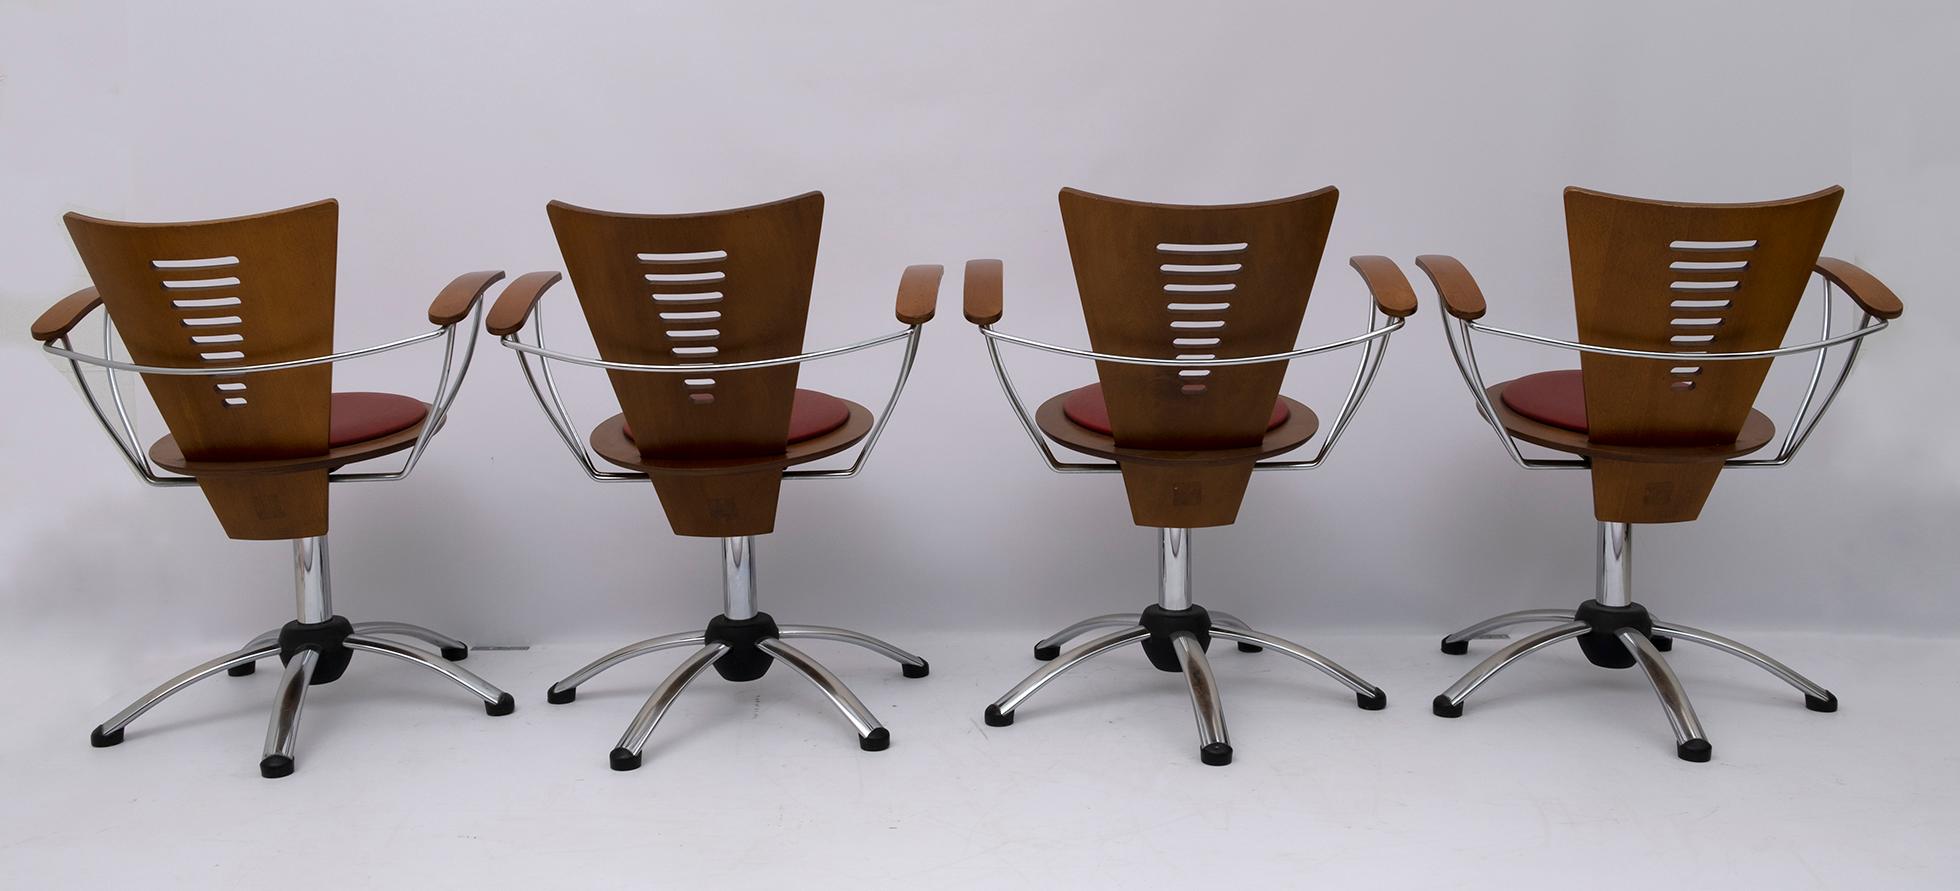 Late 20th Century Four Postmodern Italian Swivel Chairs Curved Wood and Chromed Metal, 1980s For Sale